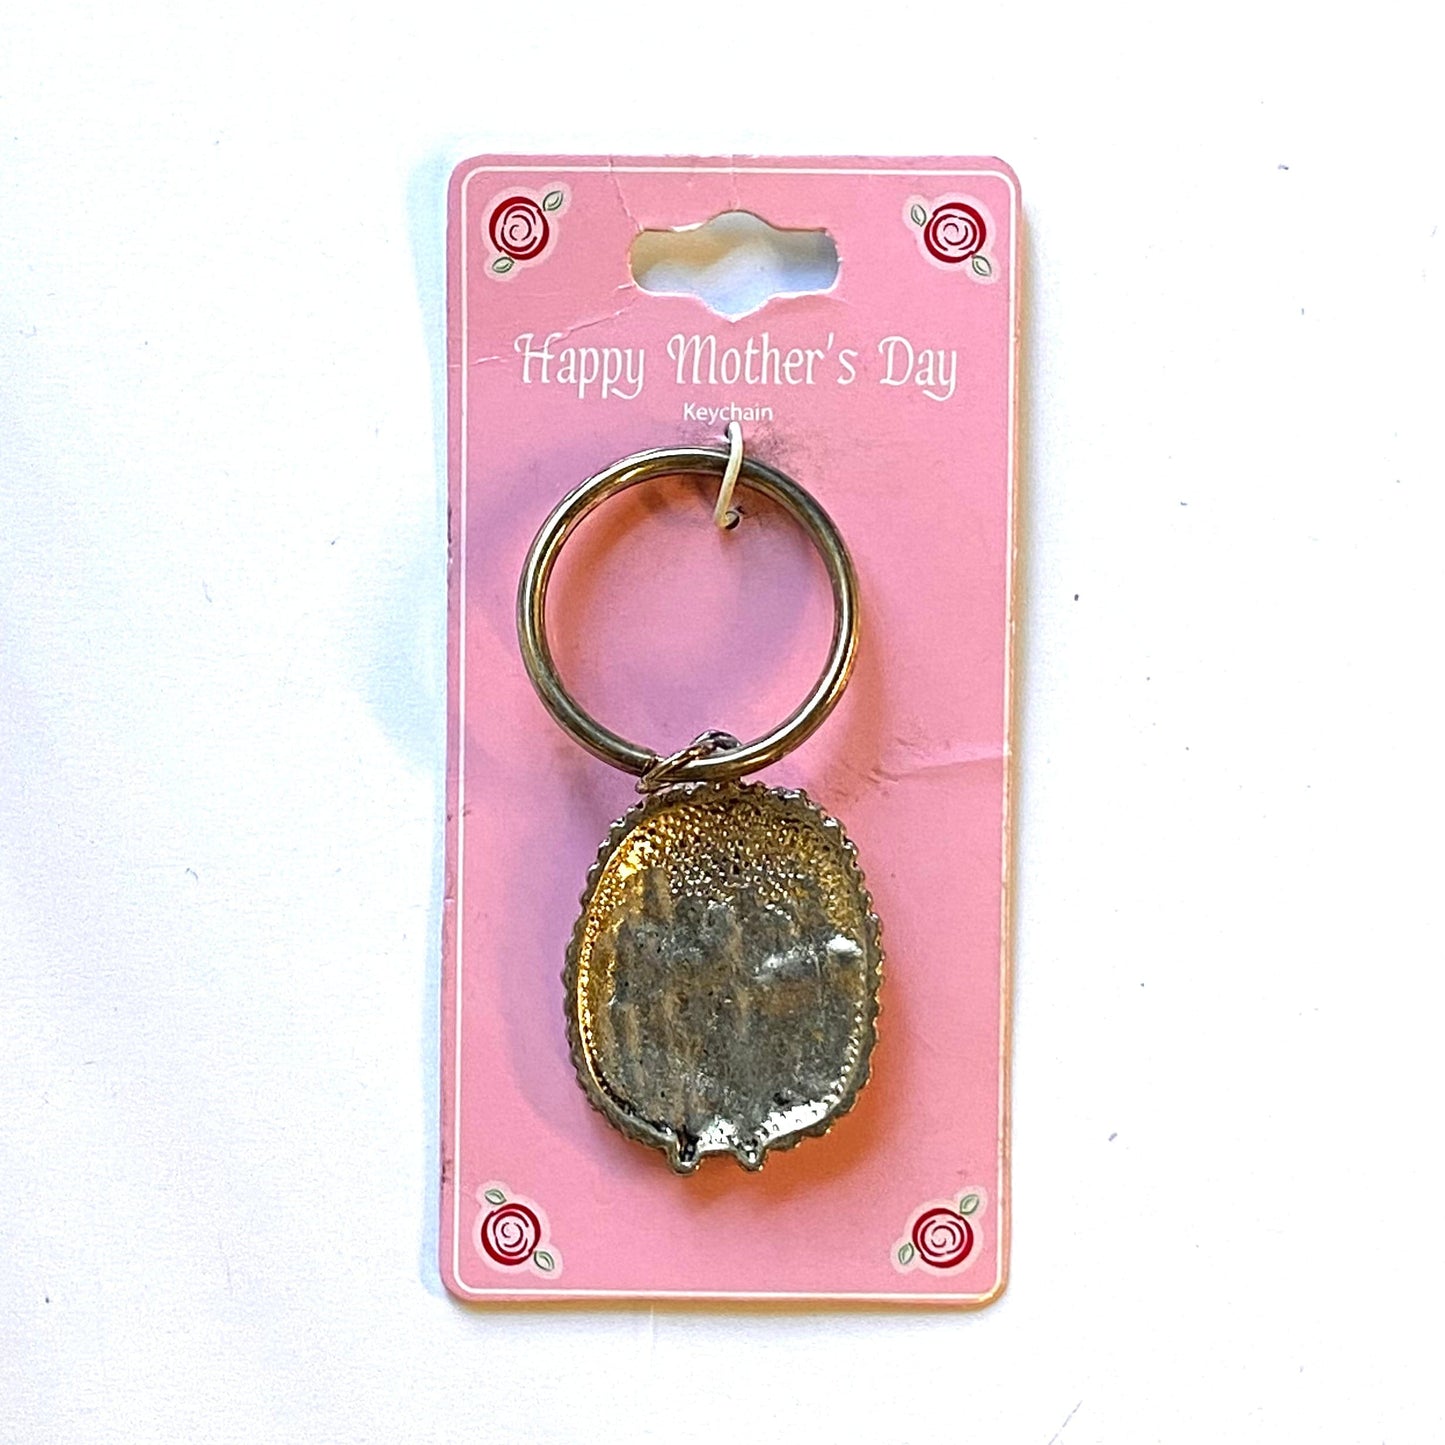 Happy Mothers Day “Grandma is Special” Keychain Key Ring Metal